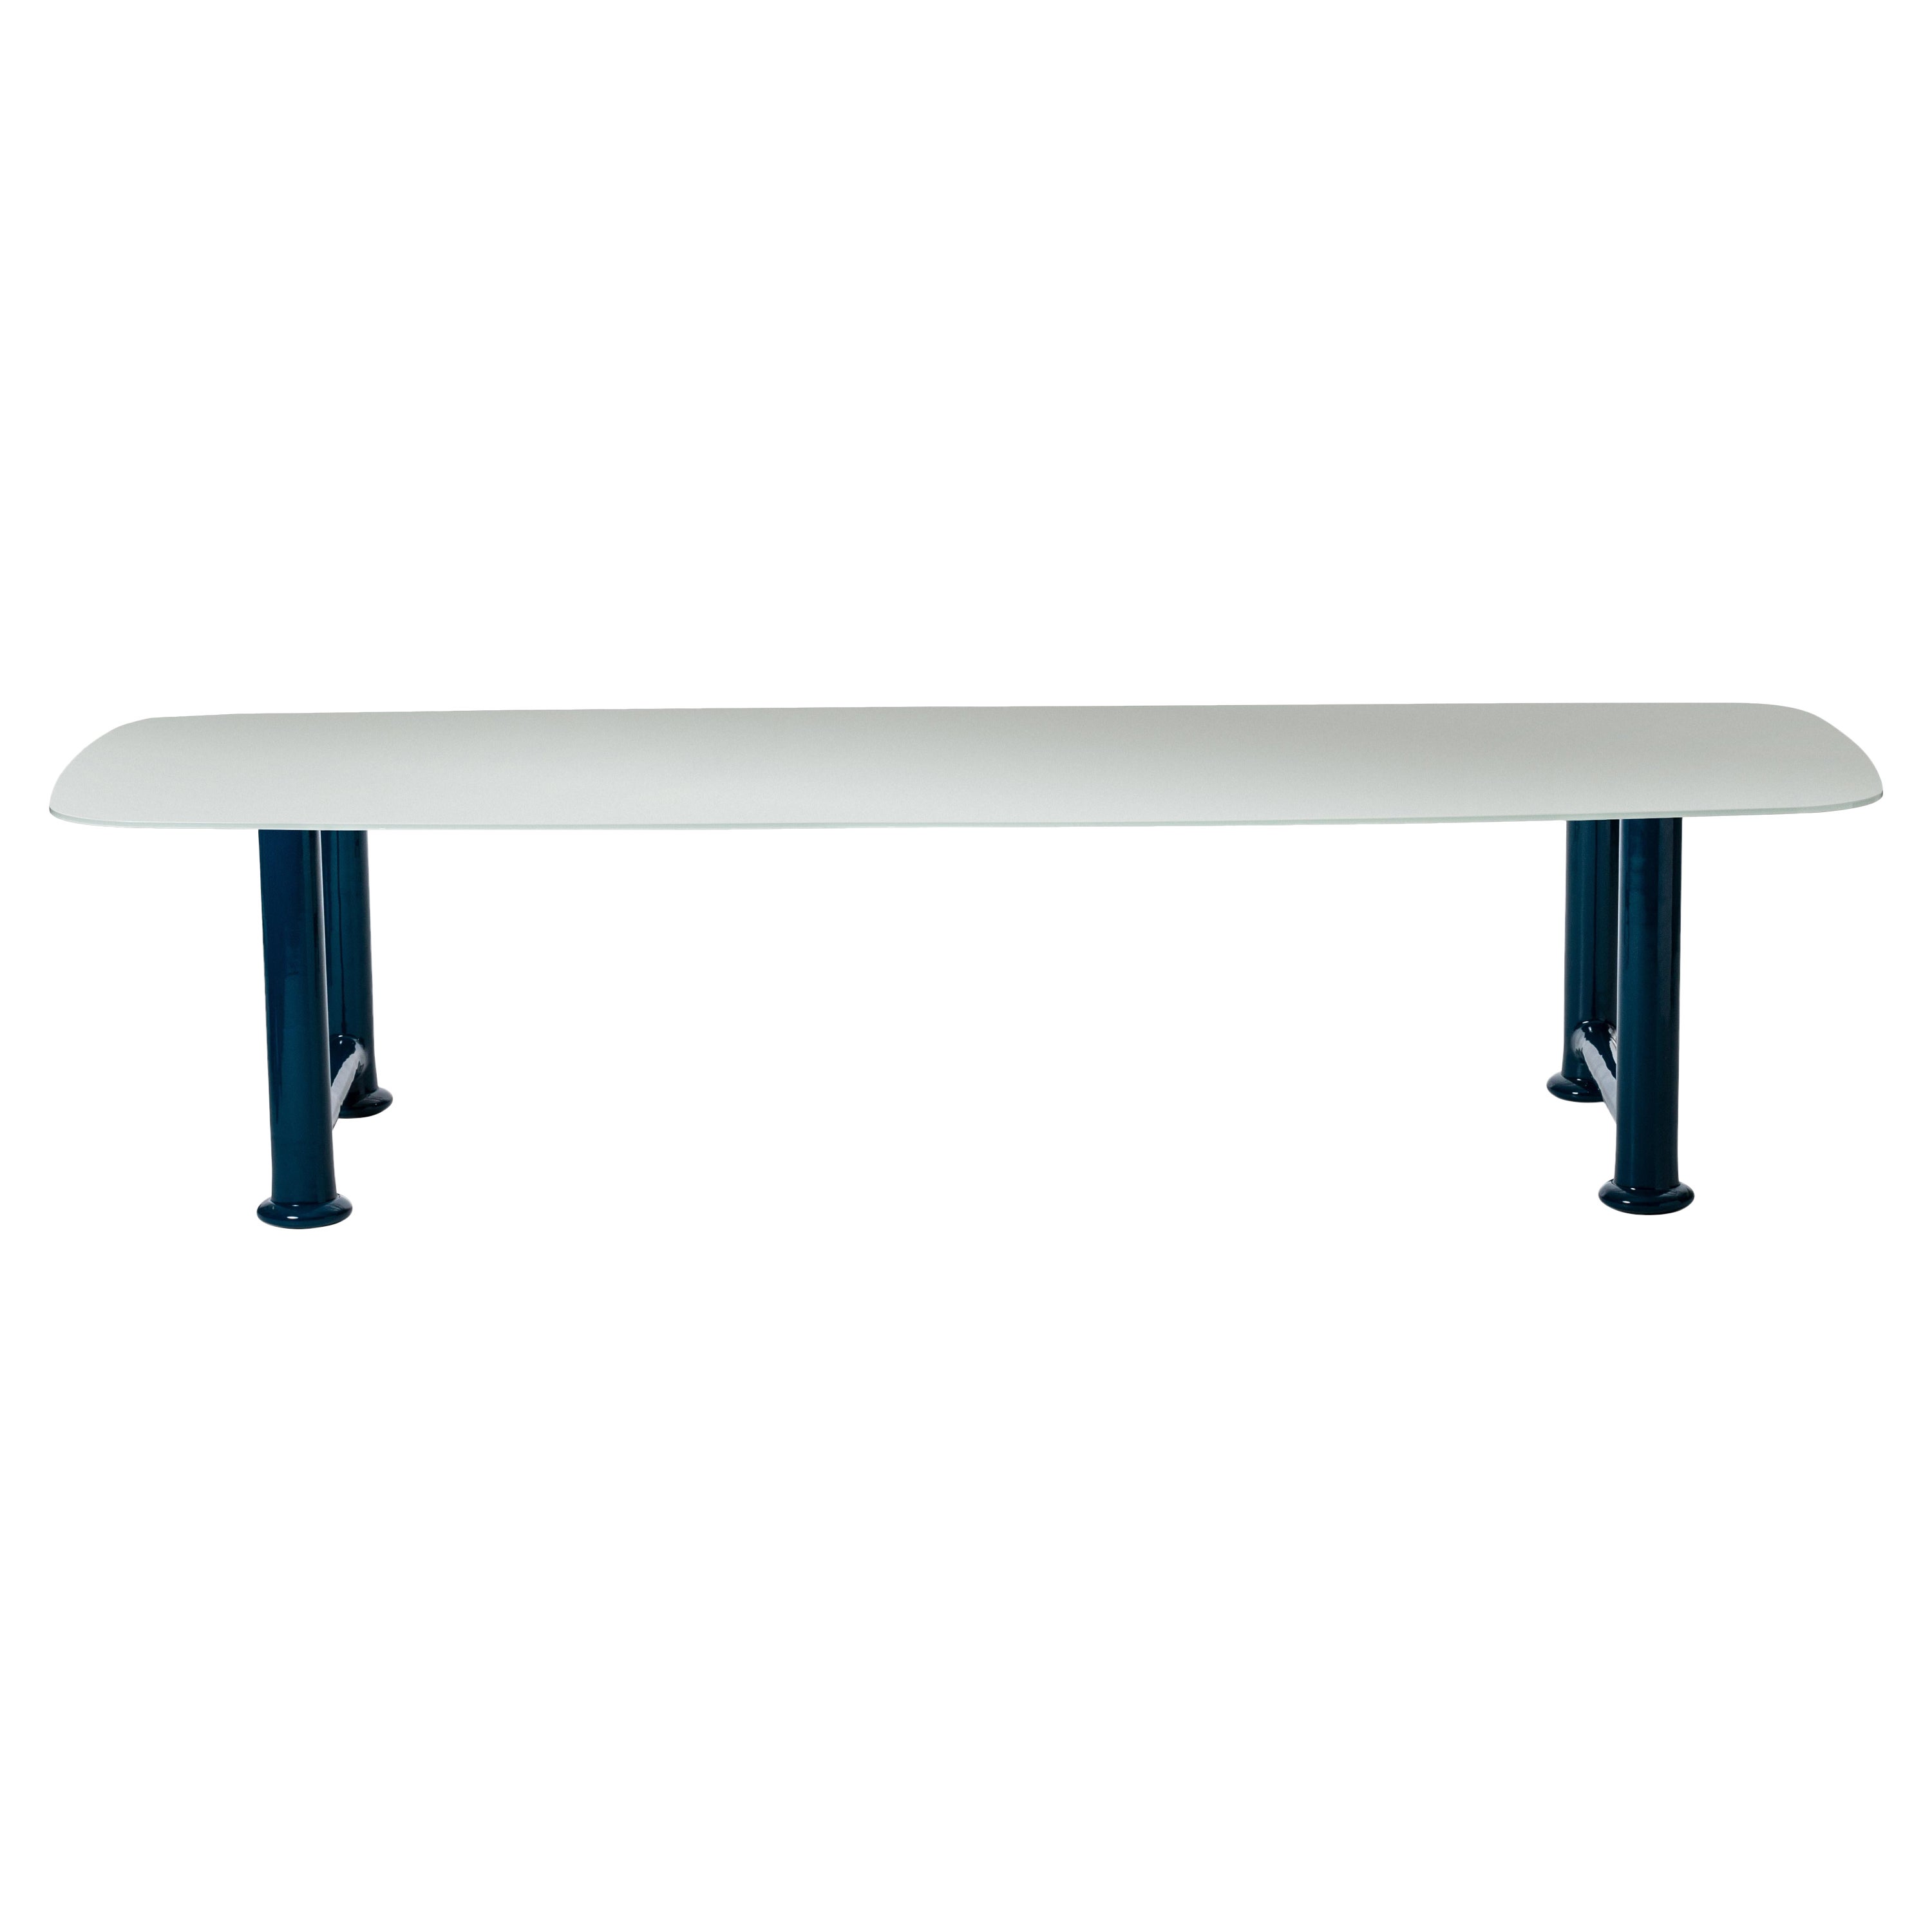 Gervasoni Next 33 Table in Ocean Lacquered & Tempered Glass Top by Paola Navone